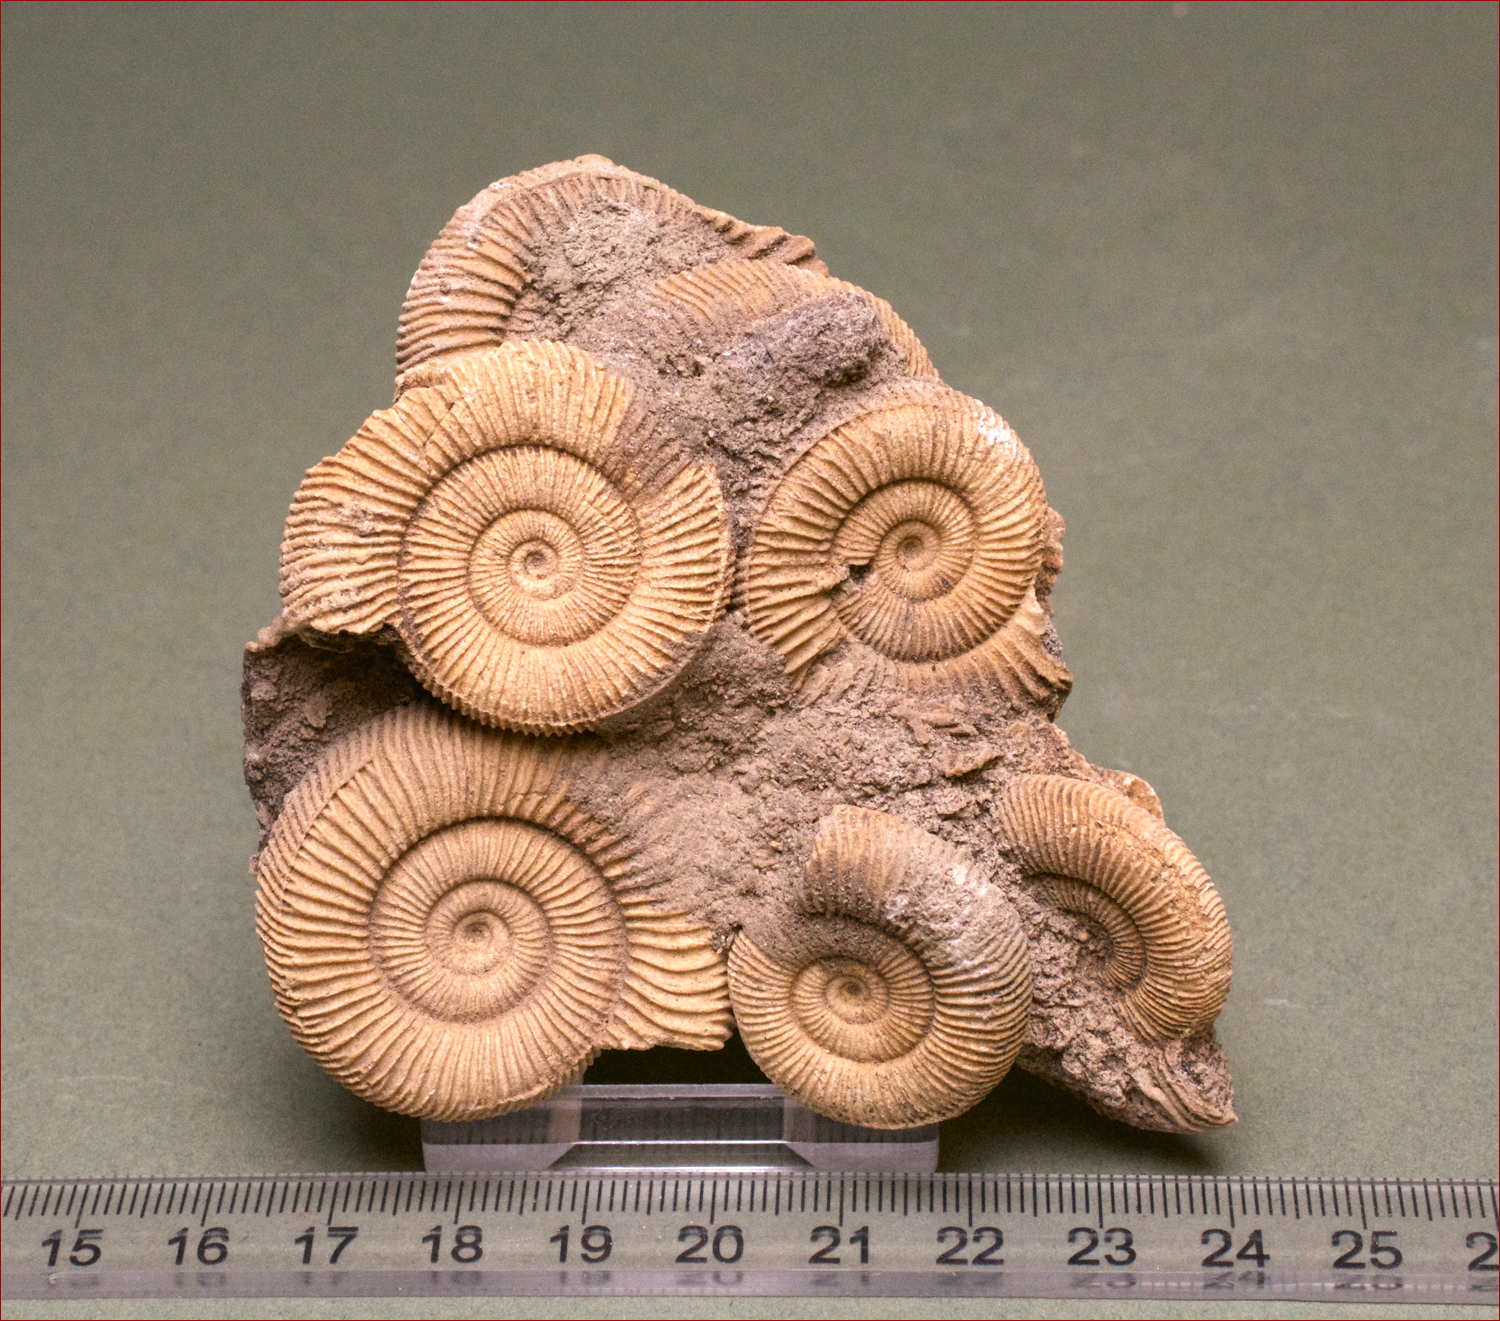 Interesting ammonite death bed from Germany.